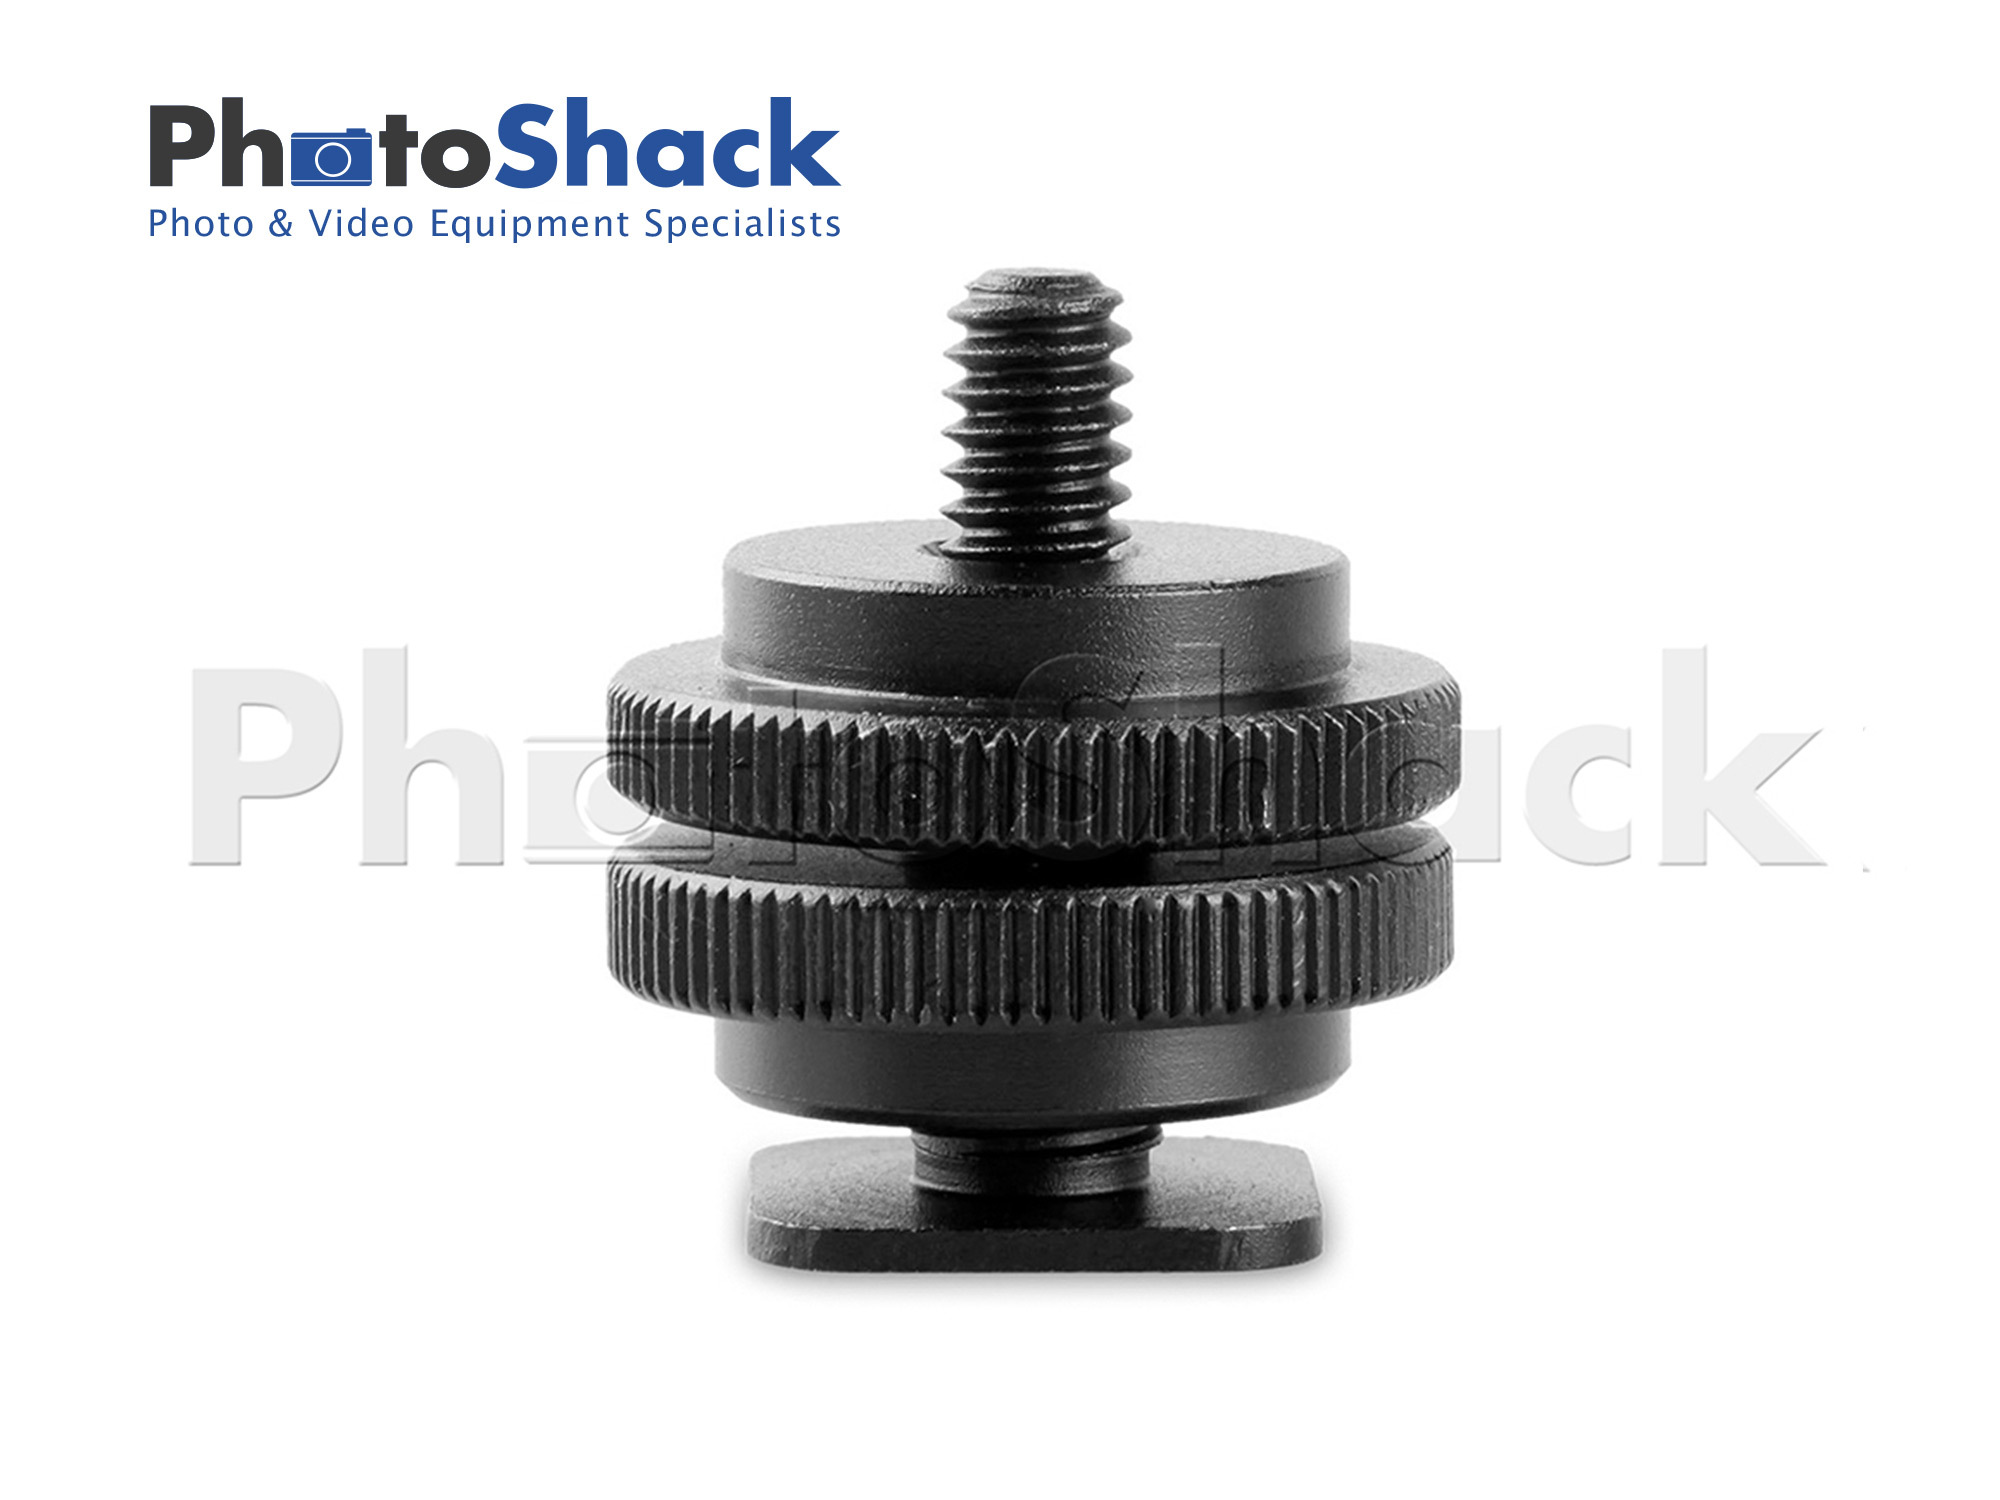 Cold Shoe Adapter with 3/8" to 1/4" thread